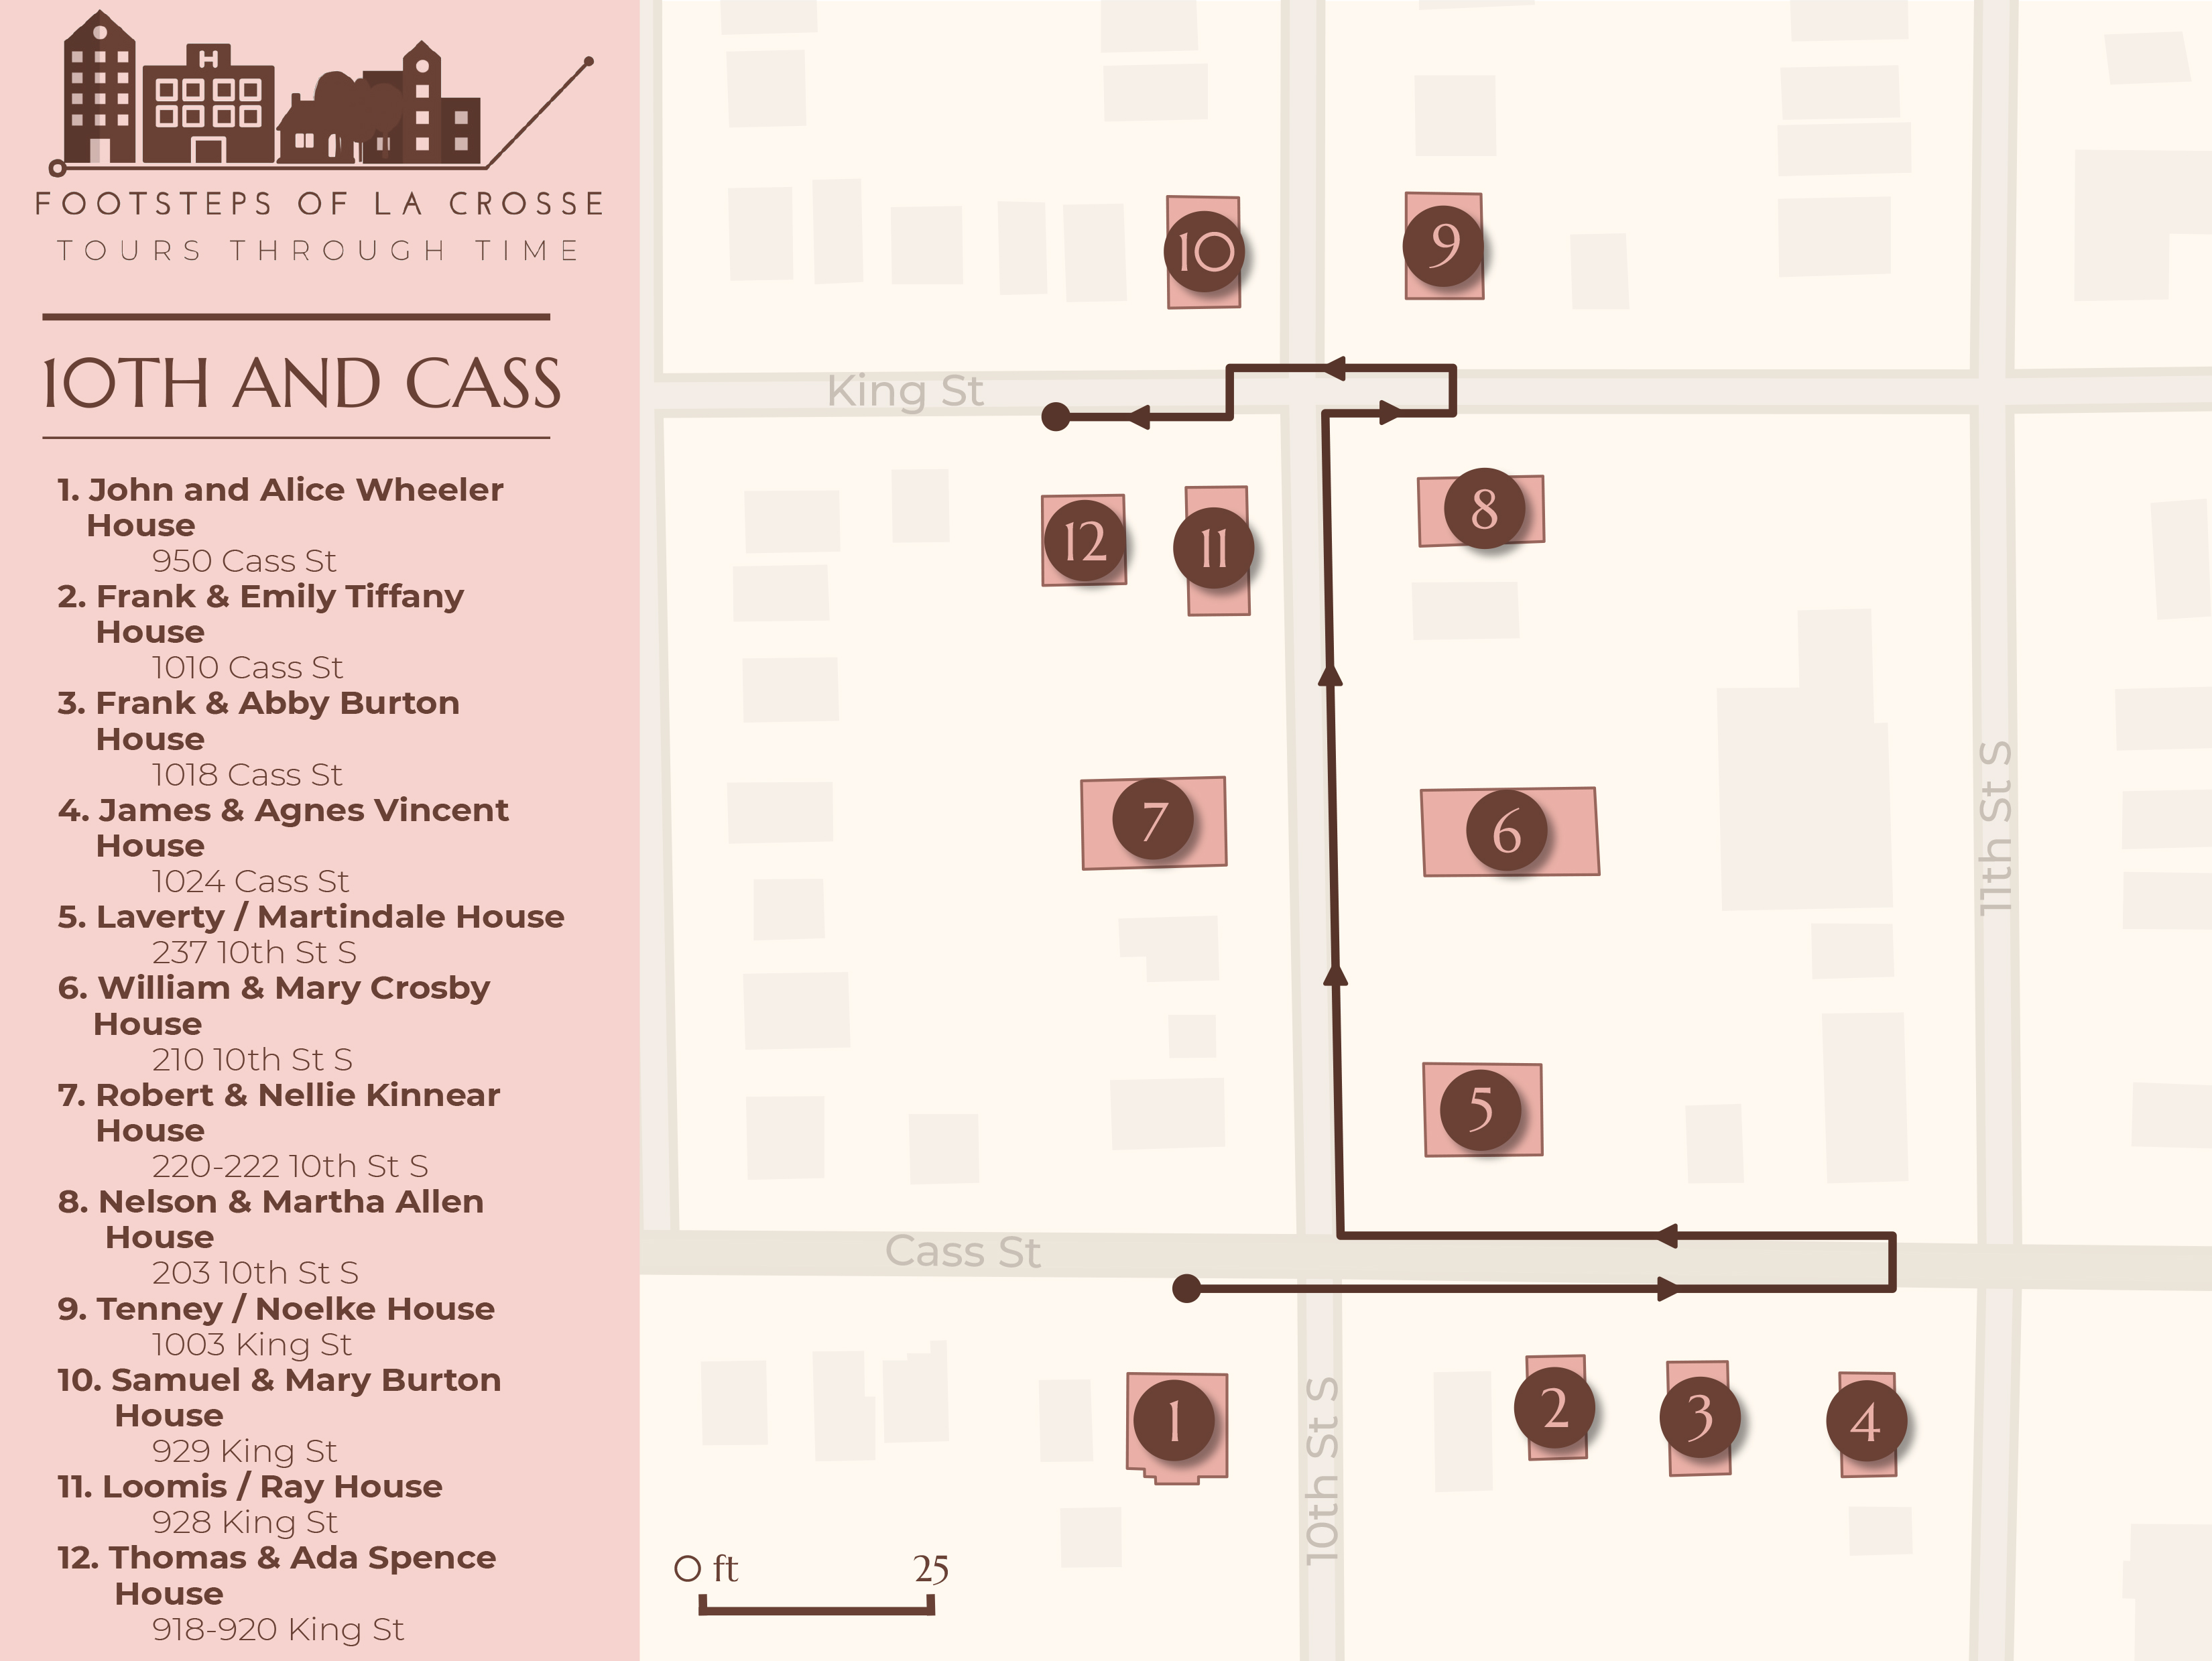 map showing 10th and cass neighborhood with route for tour